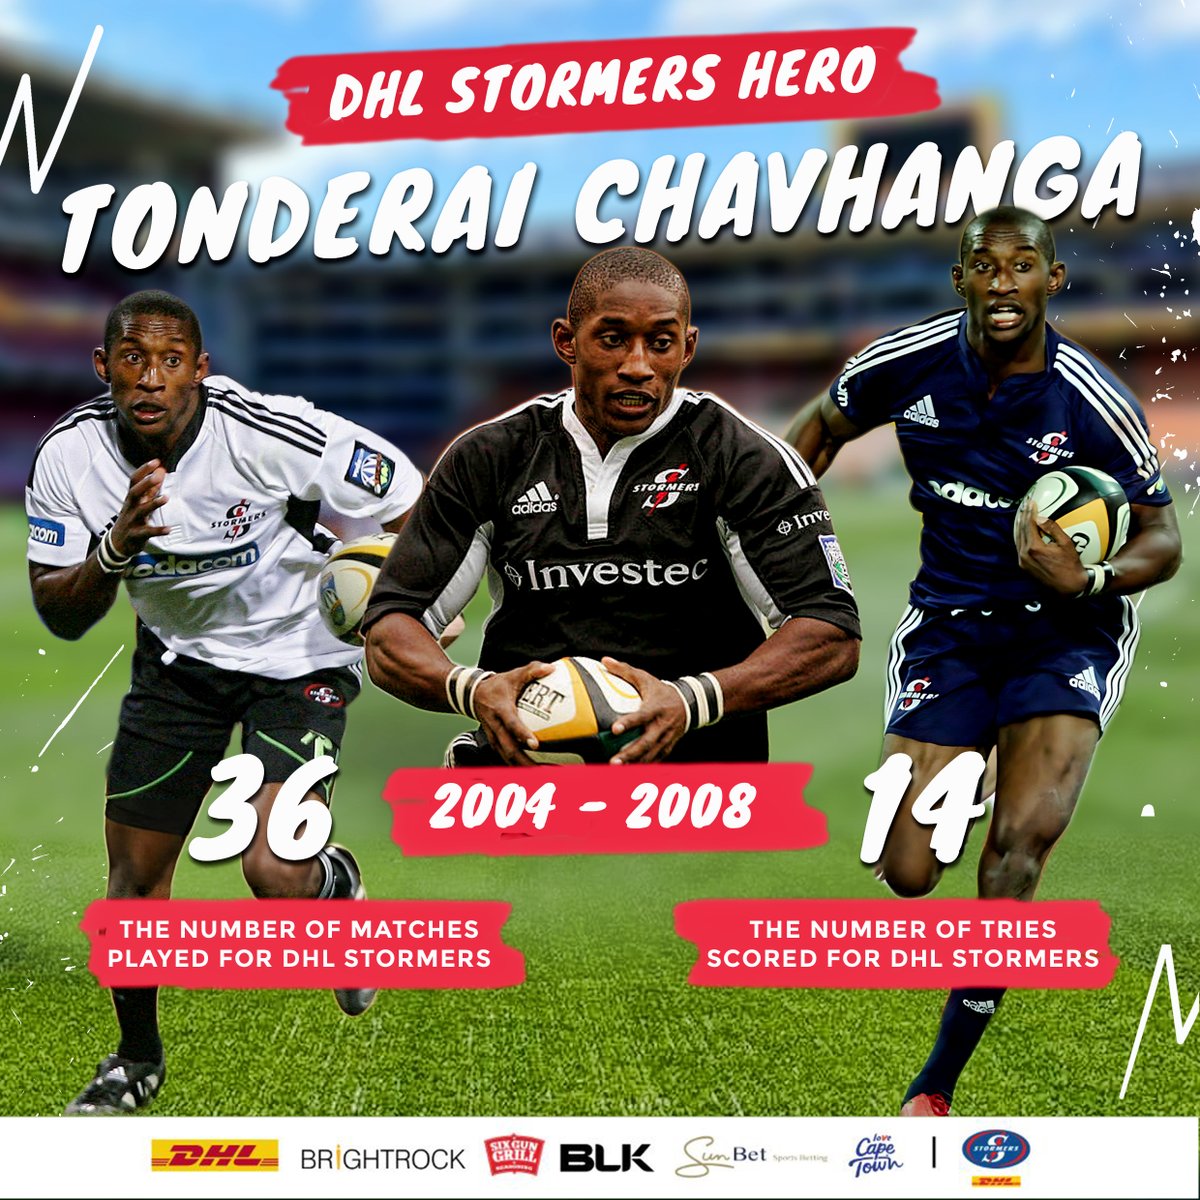 DHL Stormers speedster Tonderai Chavhanga scorched defenders every chance he got and made it look easy. #iamastormer #dhldelivers thestormers.com/dhl-stormers-l…